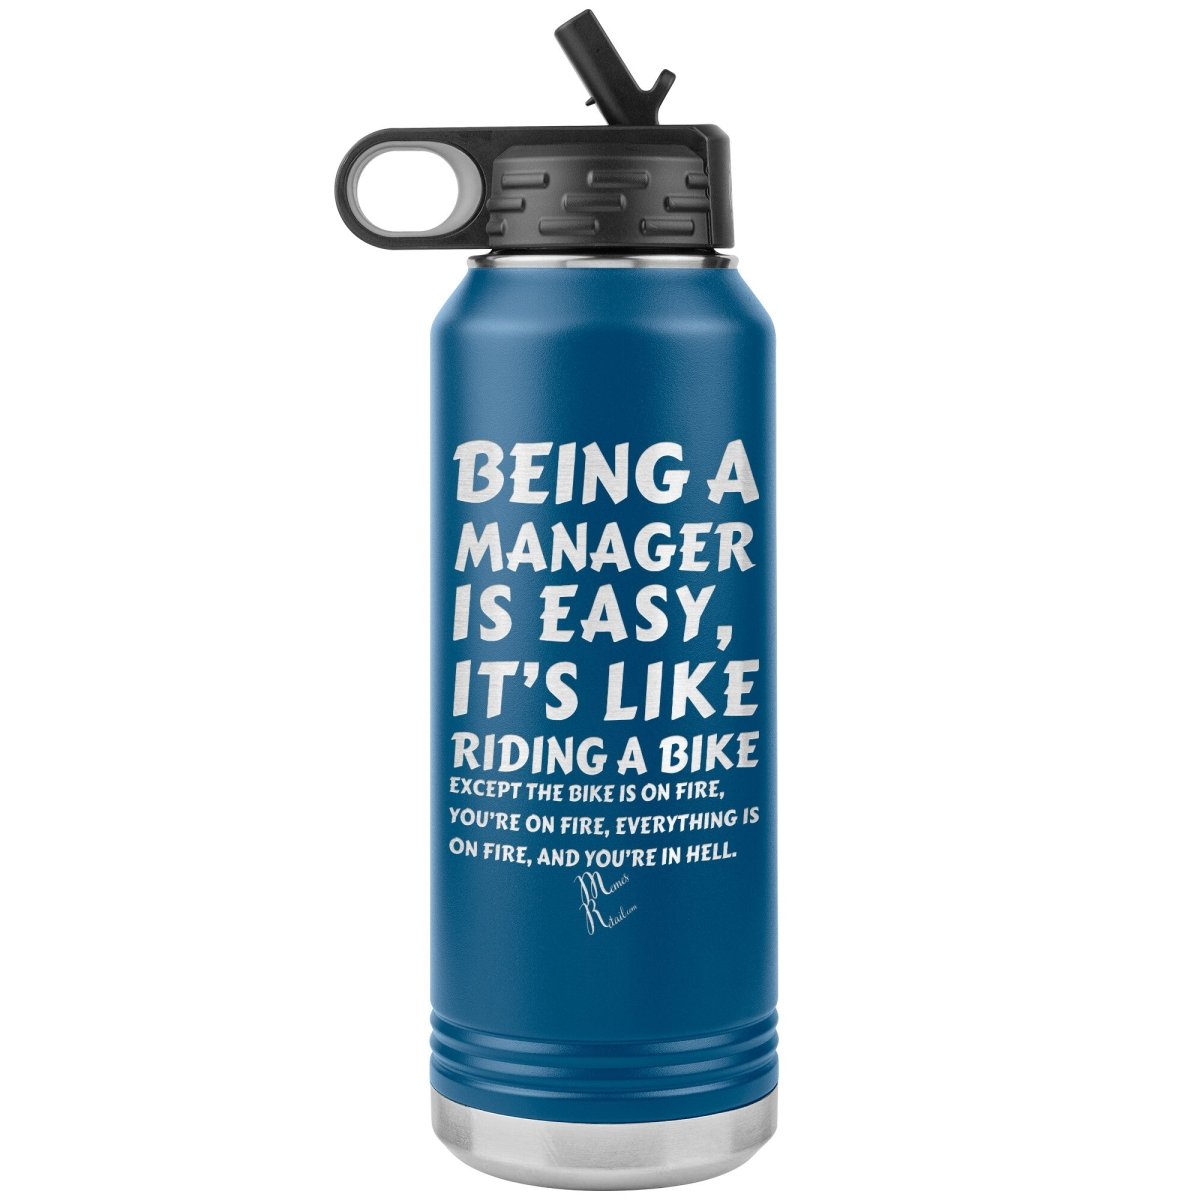 Being a manager is easy….32oz Water Tumbler, Blue - MemesRetail.com